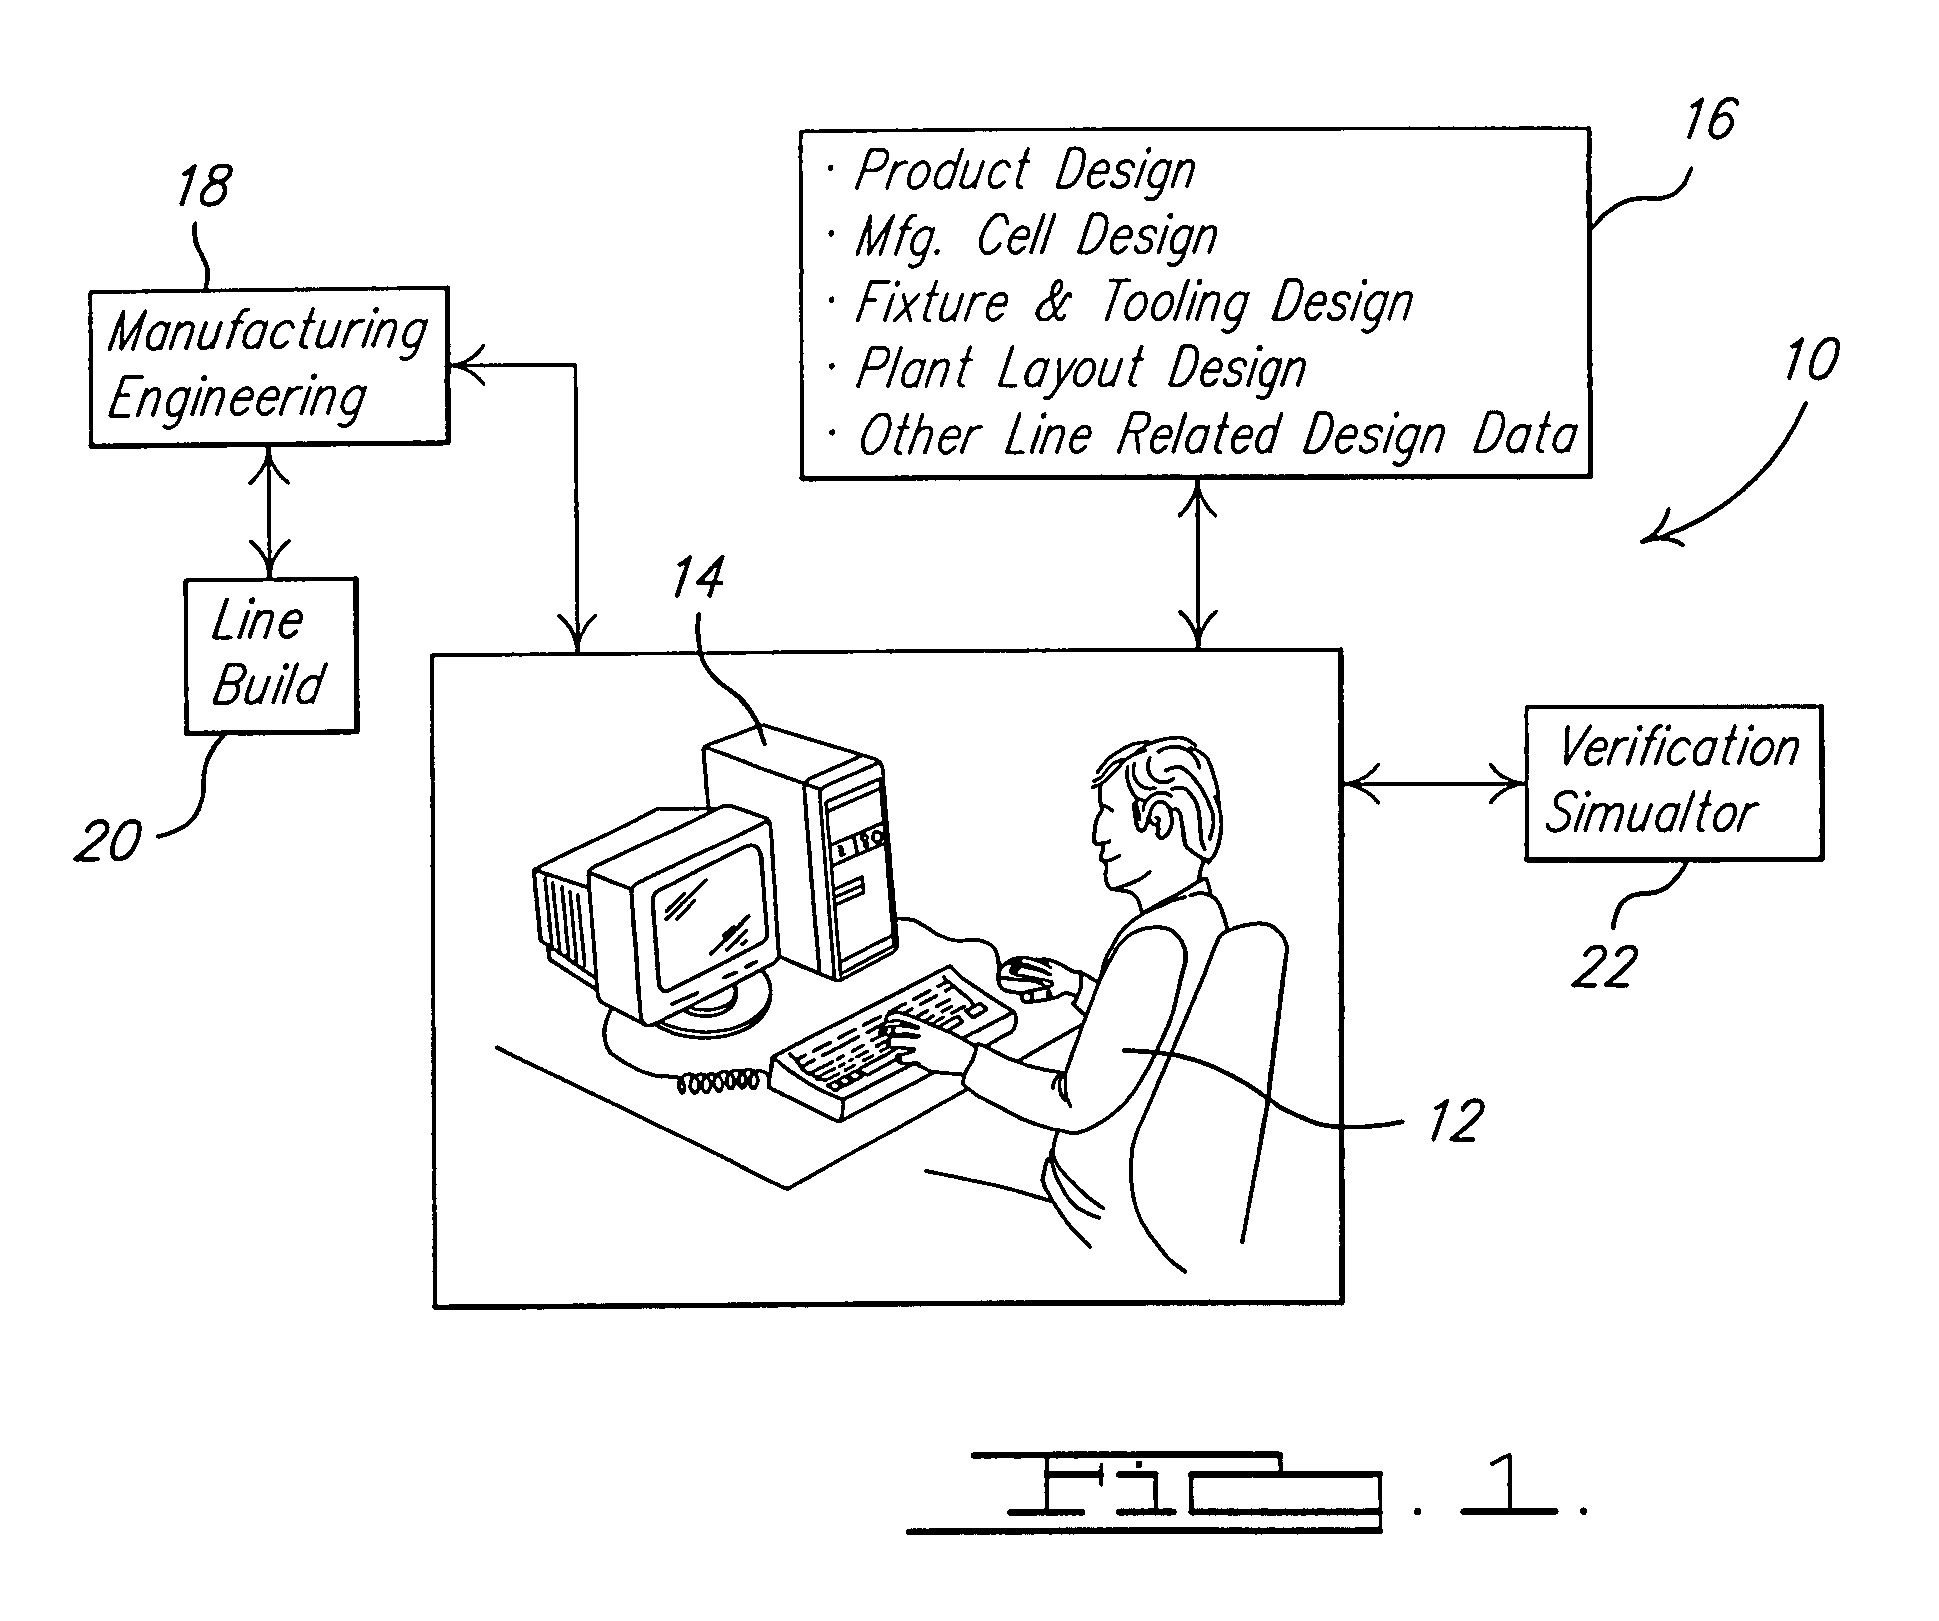 Method of embedding tooling control data within mechanical fixture design to enable programmable logic control verification simulation